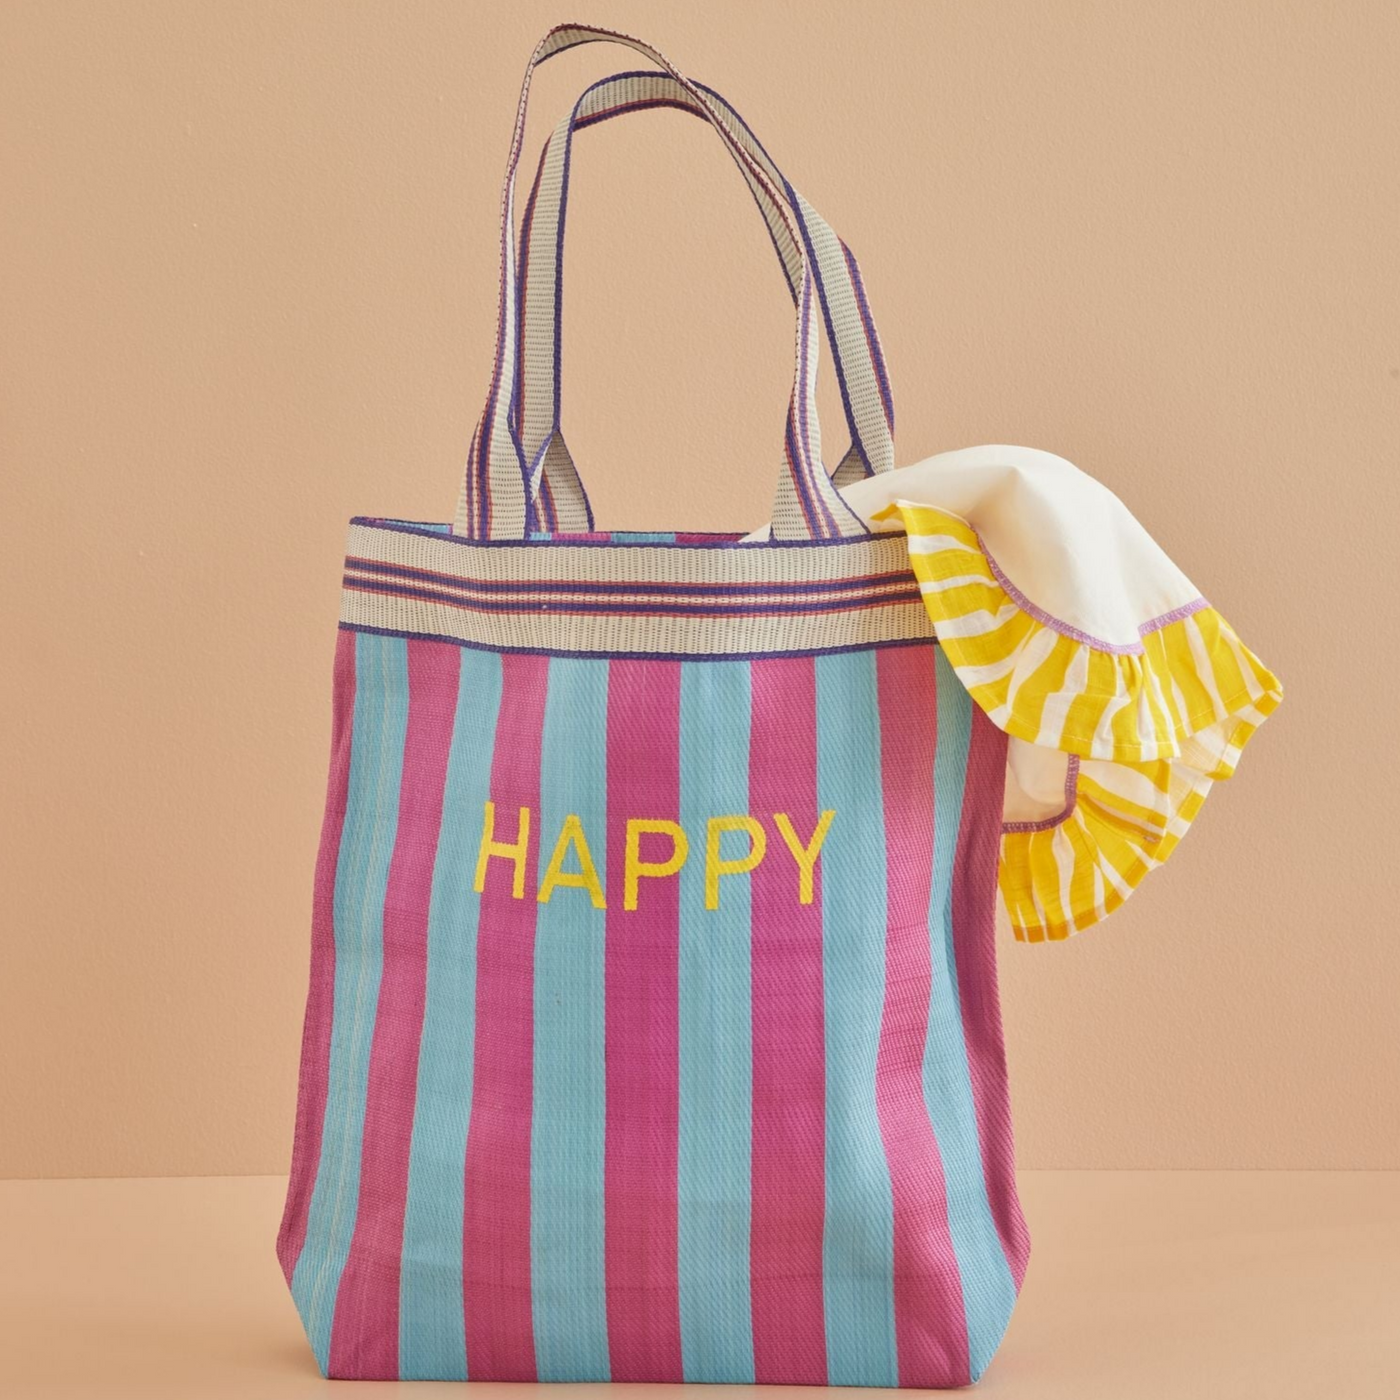 Rice - Recycled Plastic Shopping Bag - 'Happy' Stripe - Purple & Blue